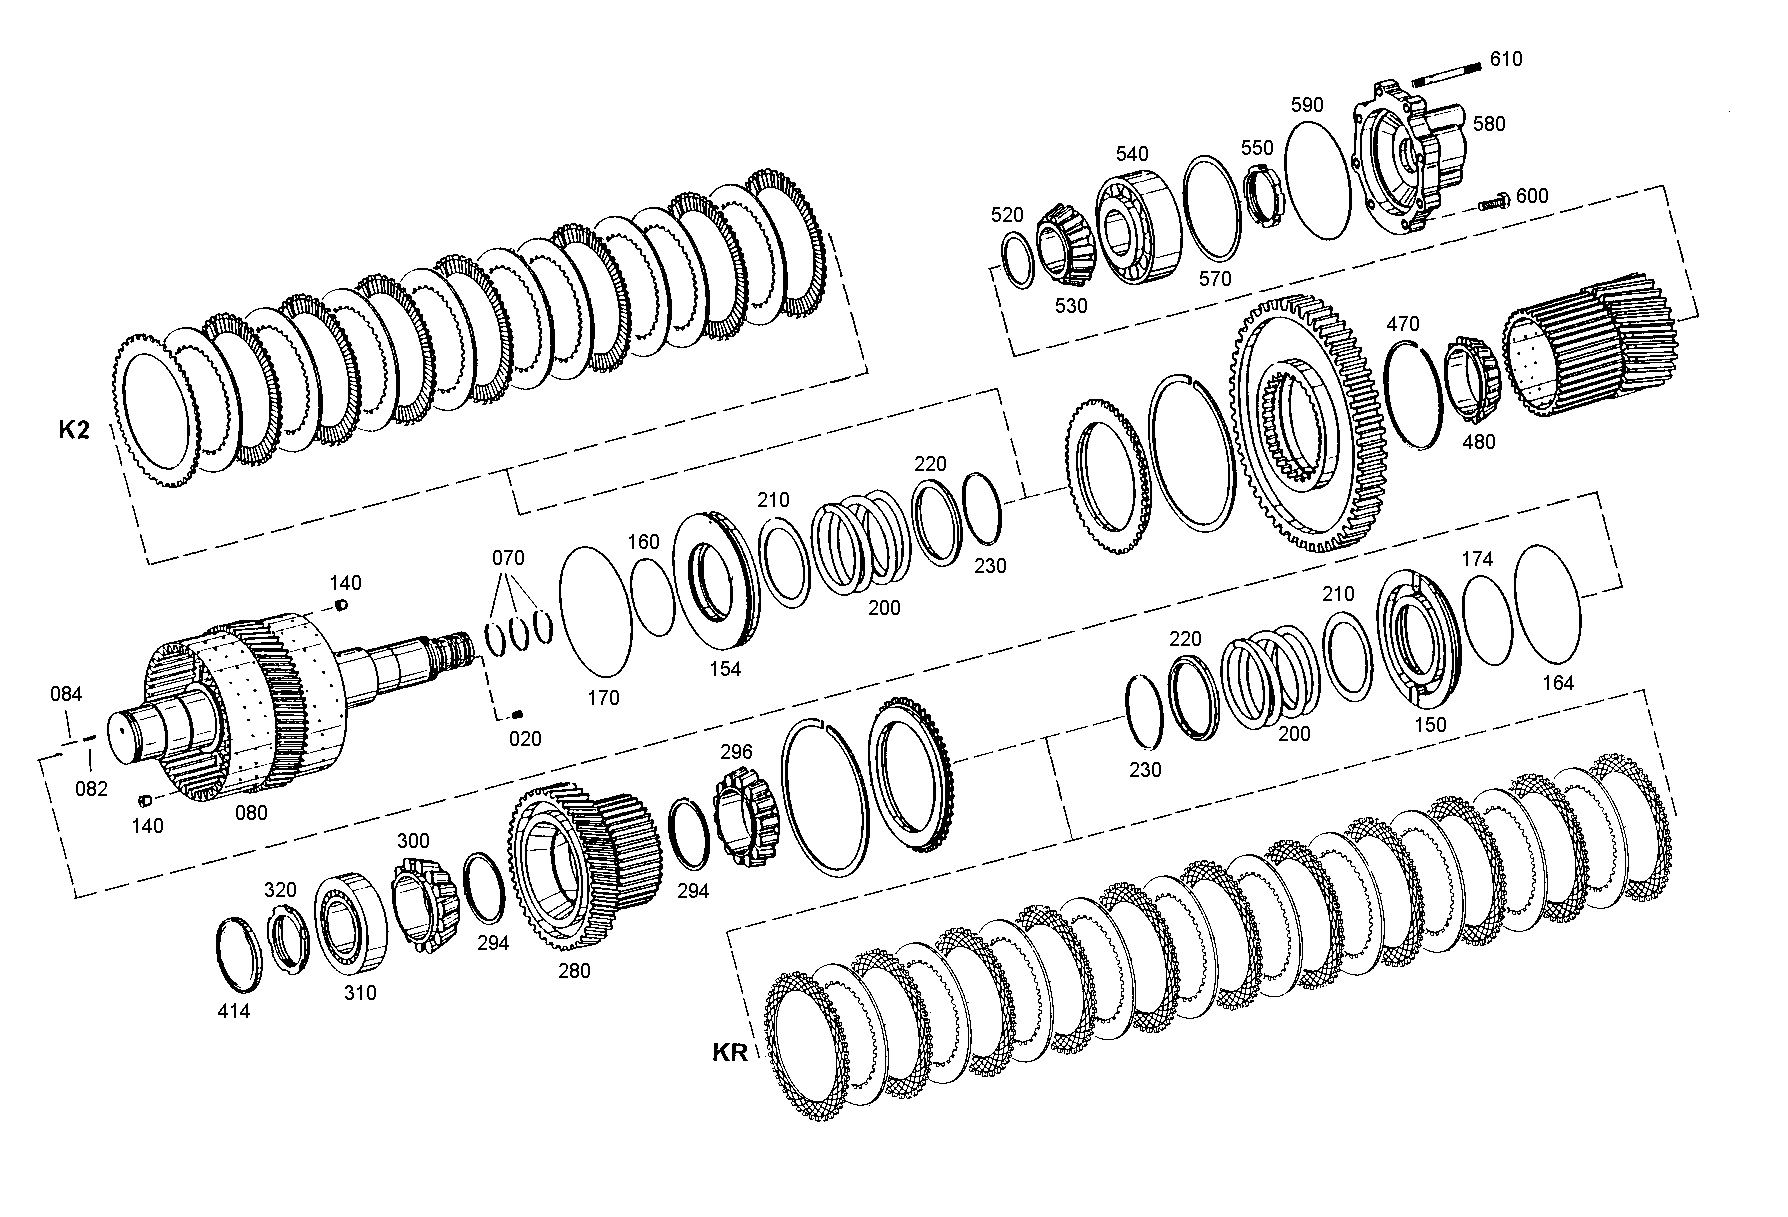 drawing for BUSINESS SOLUTIONS / DIV.GESCO 100235A1 - WASHER (figure 3)